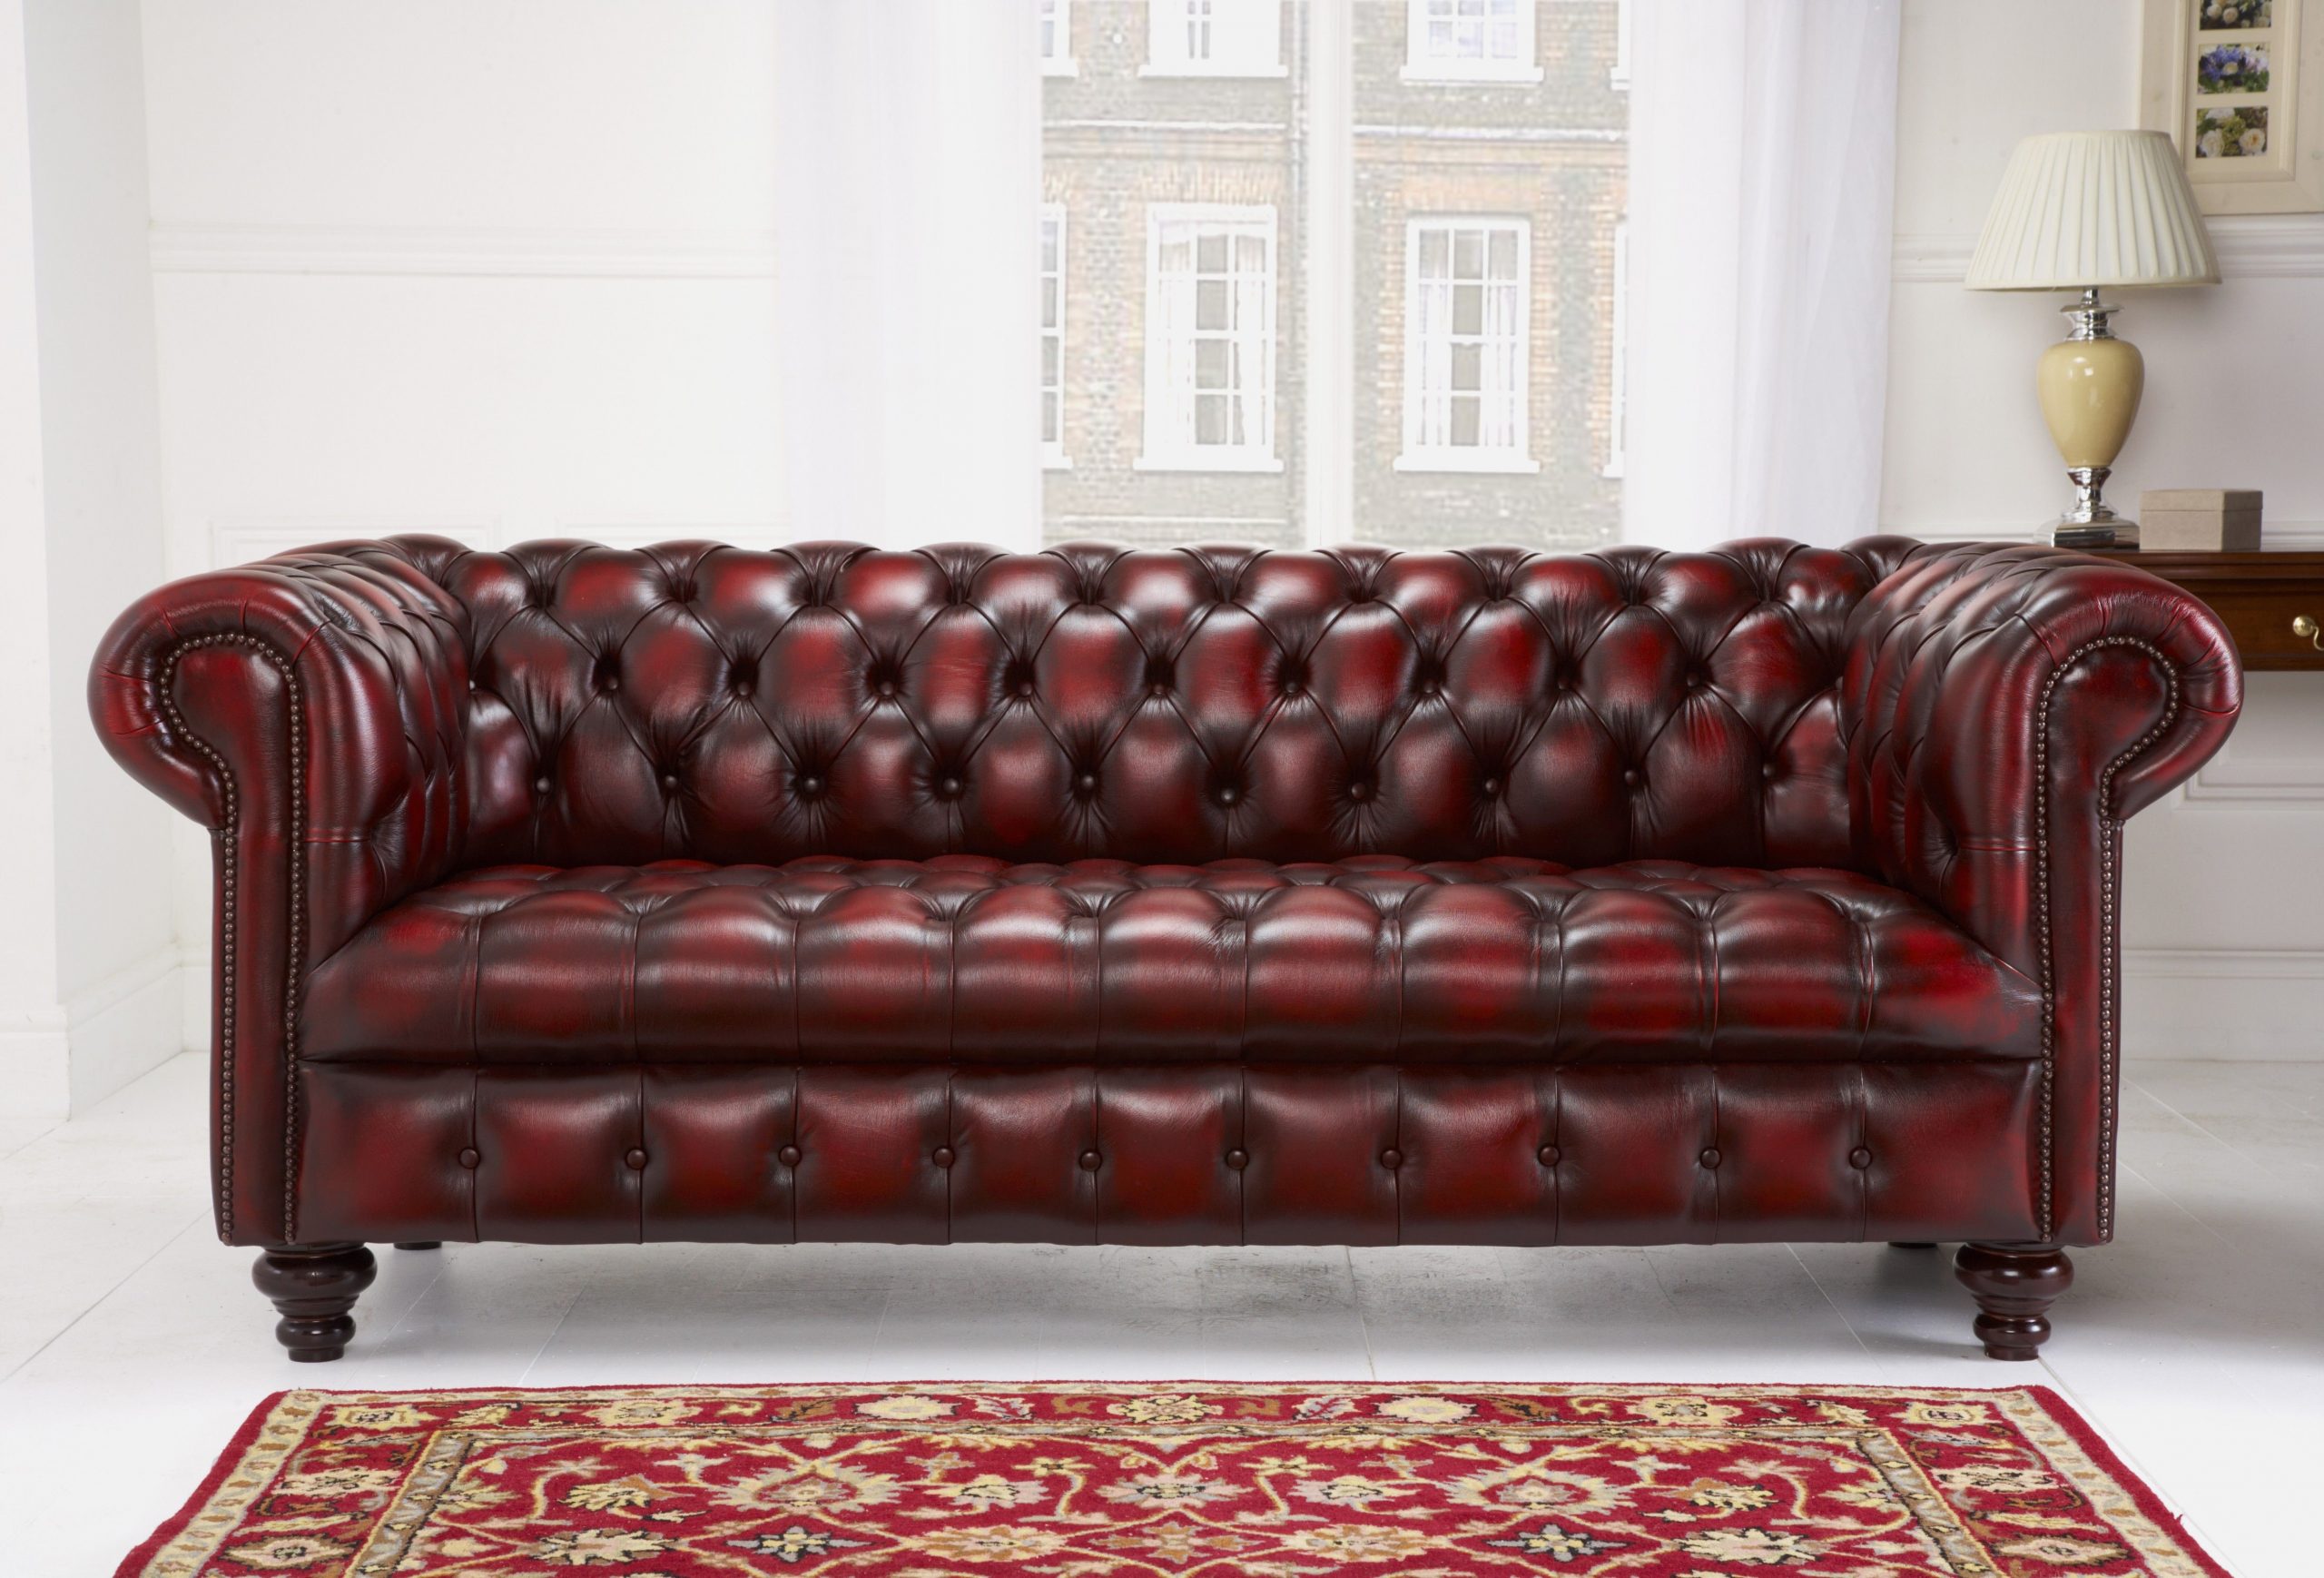 Elegant Cherry Red Leather Sofa , Best Cherry Red Leather Sofa 79 For Modern Sof...